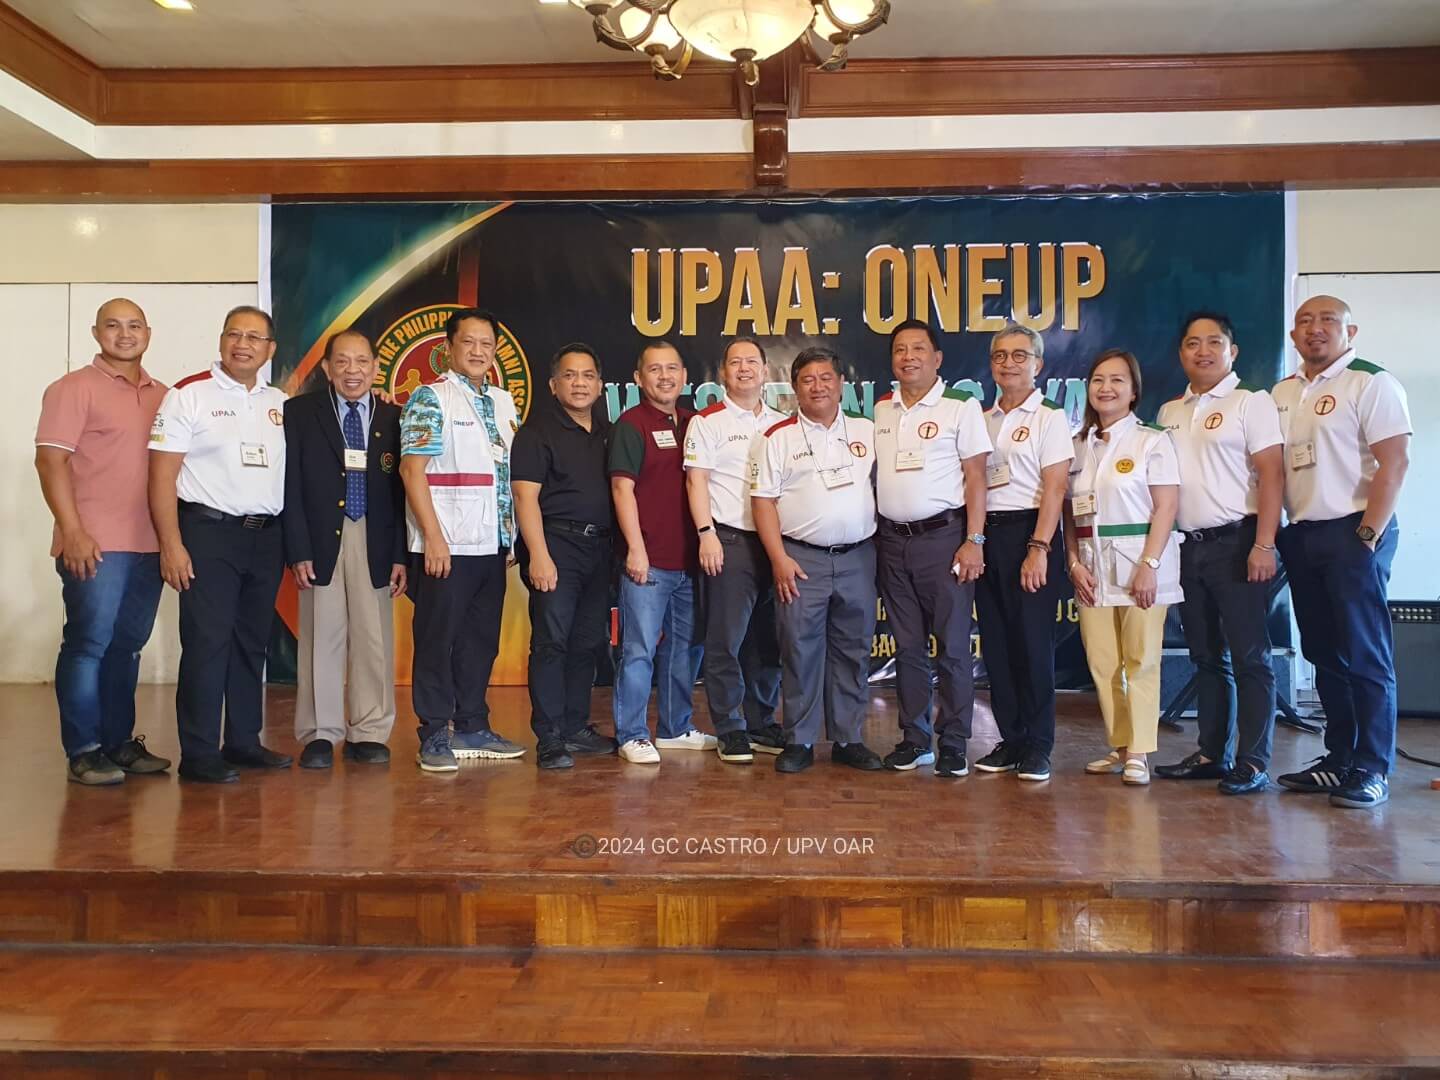 UP alumni gather for the UPAA President’s Golf Tournament and ONEUP in Bacolod